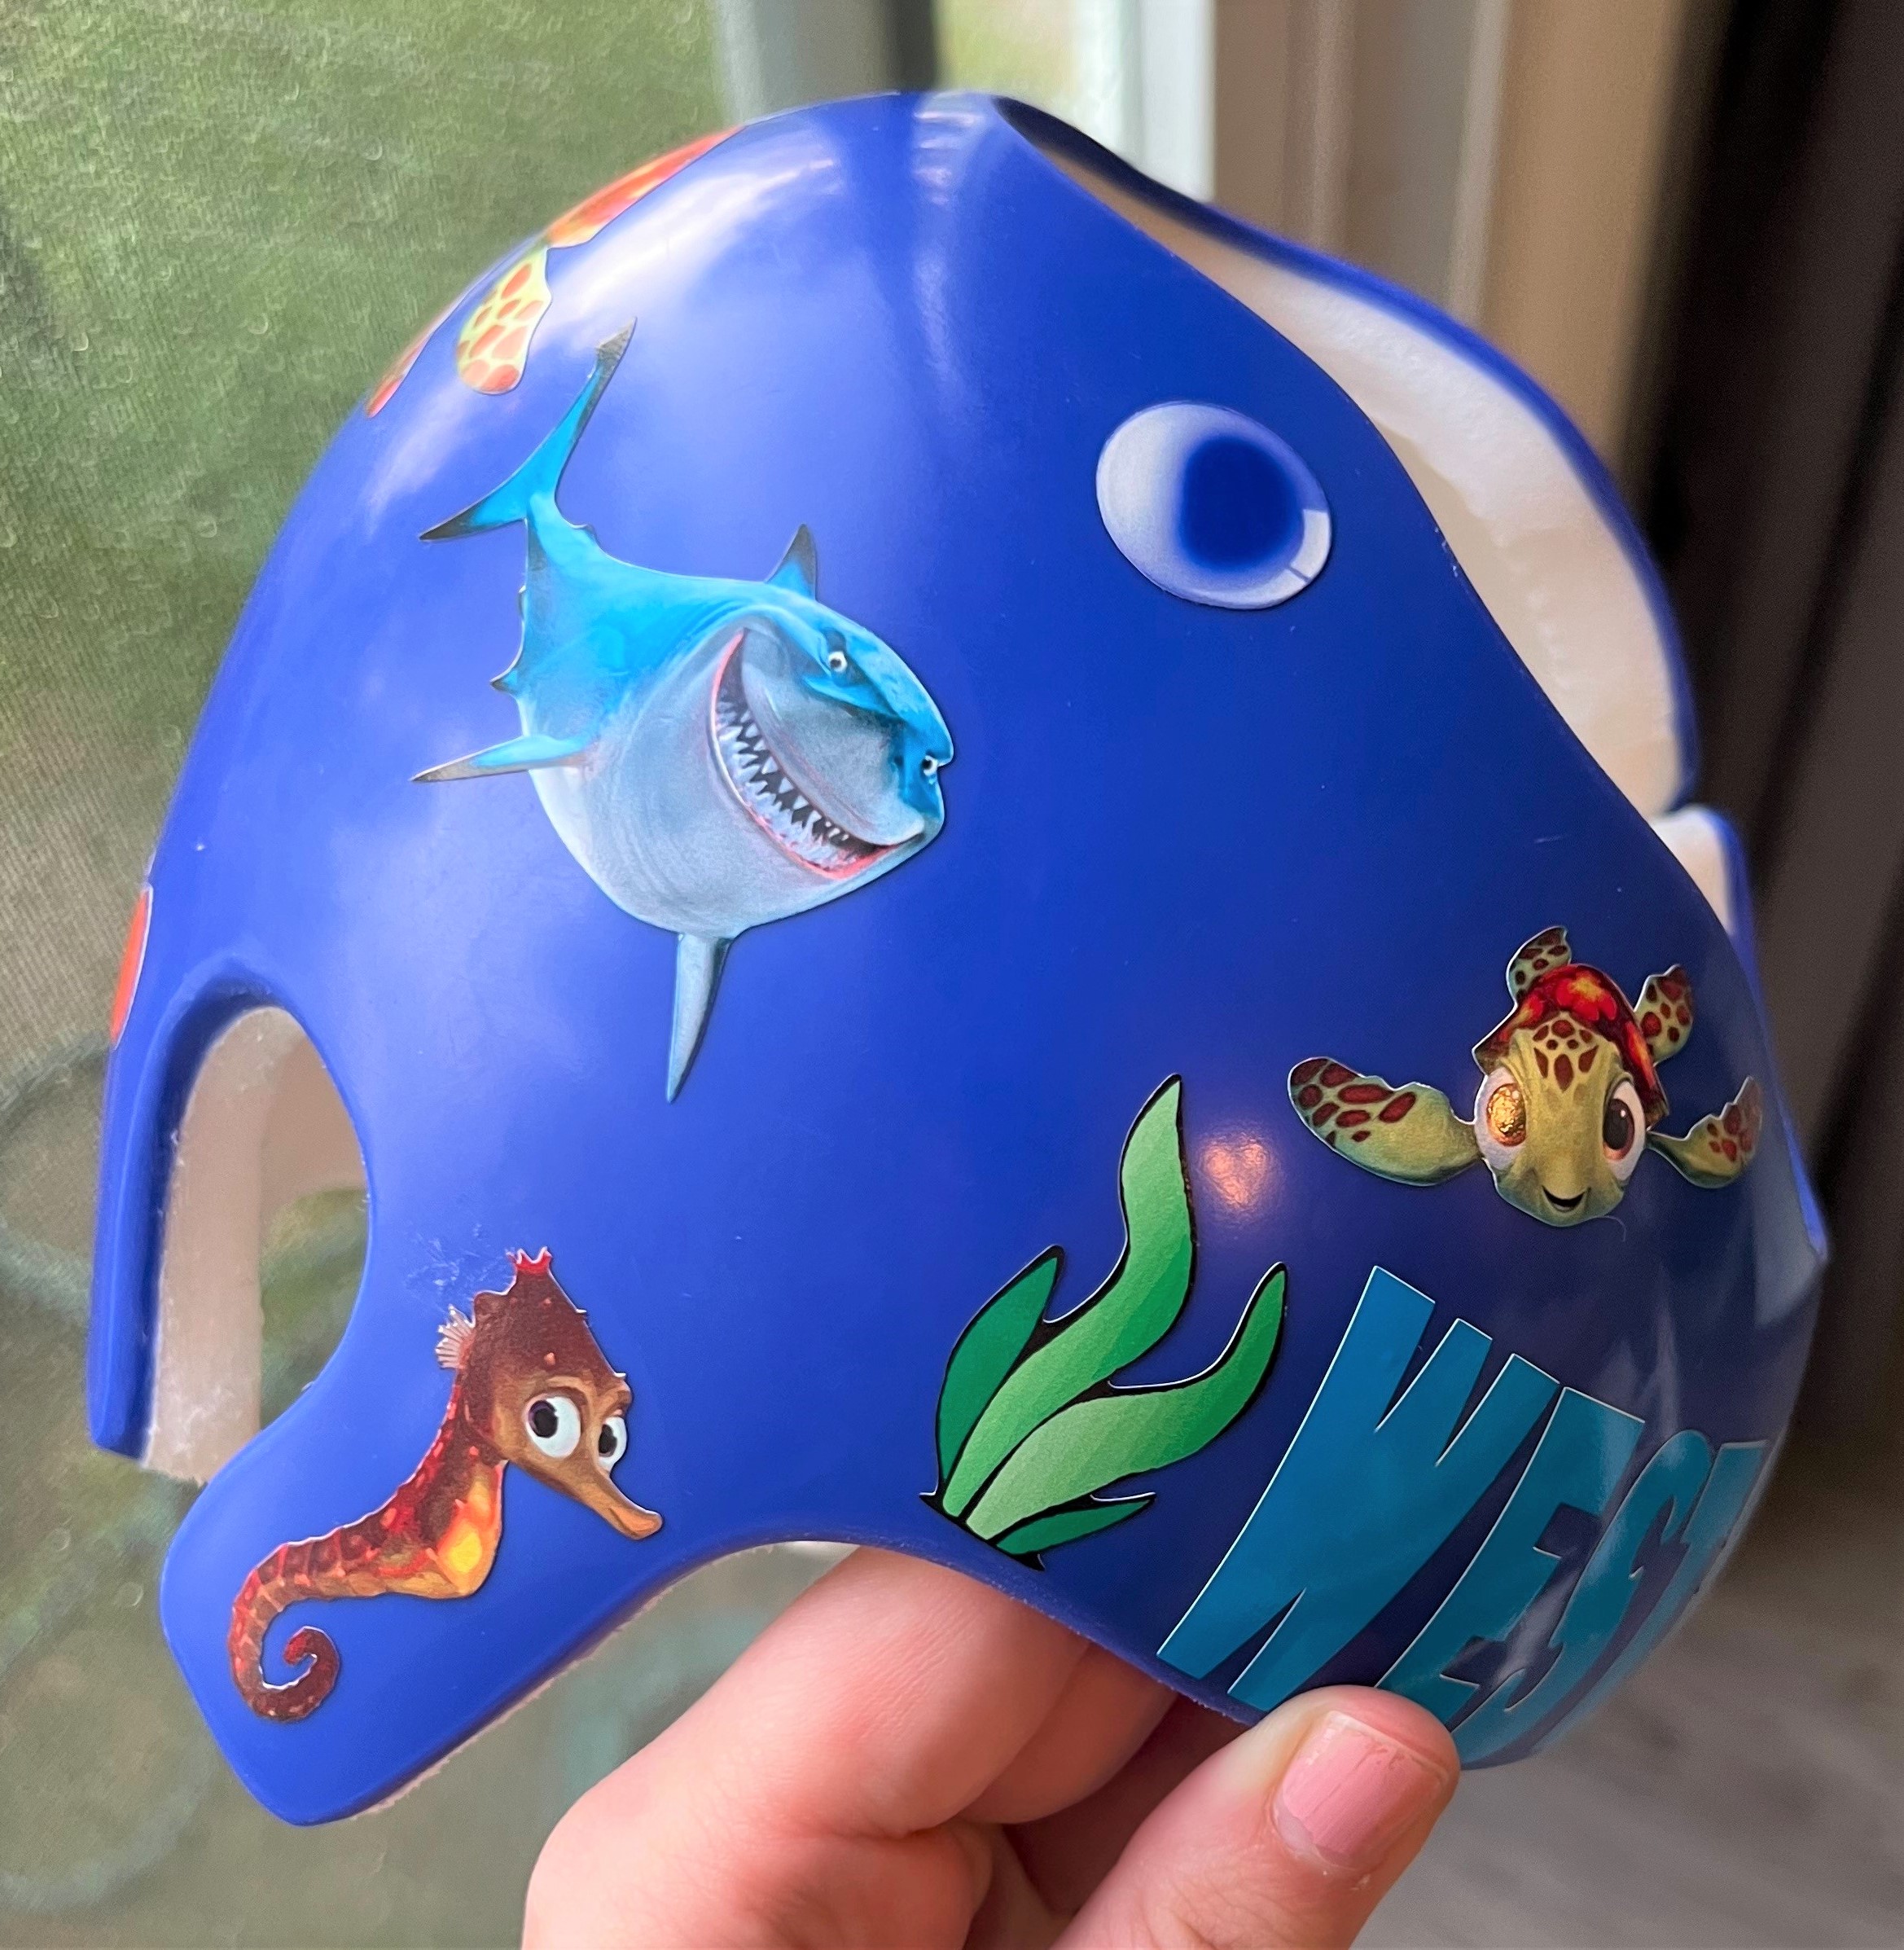 Finding Nemo cranial band decoration